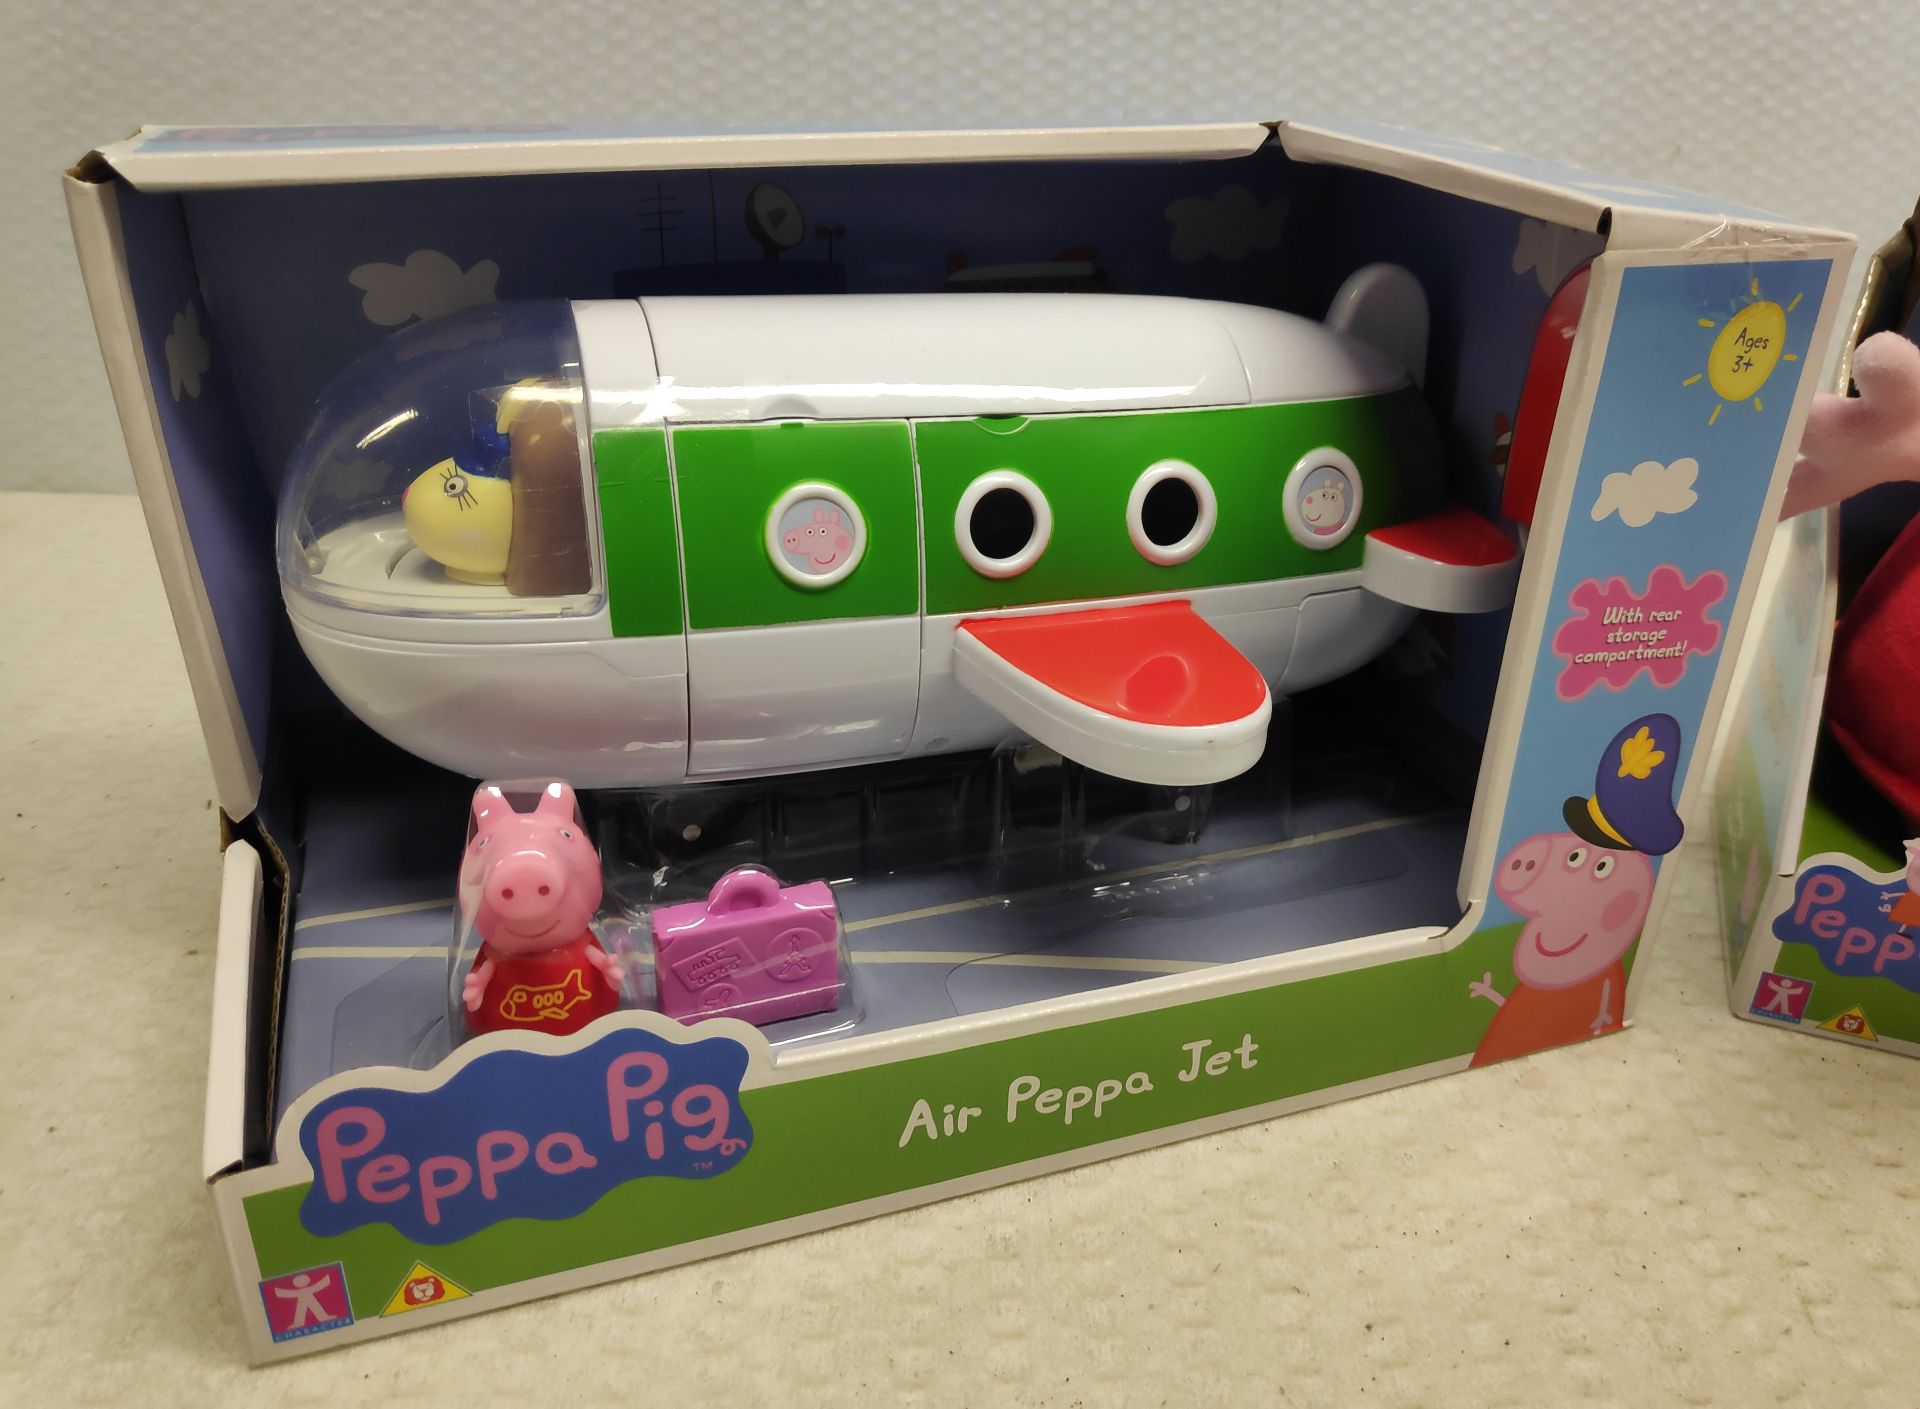 2 x Peppa Pig Toys - Glow Friends Peppa and Air Peppa Jet - New/Boxed - Image 2 of 7